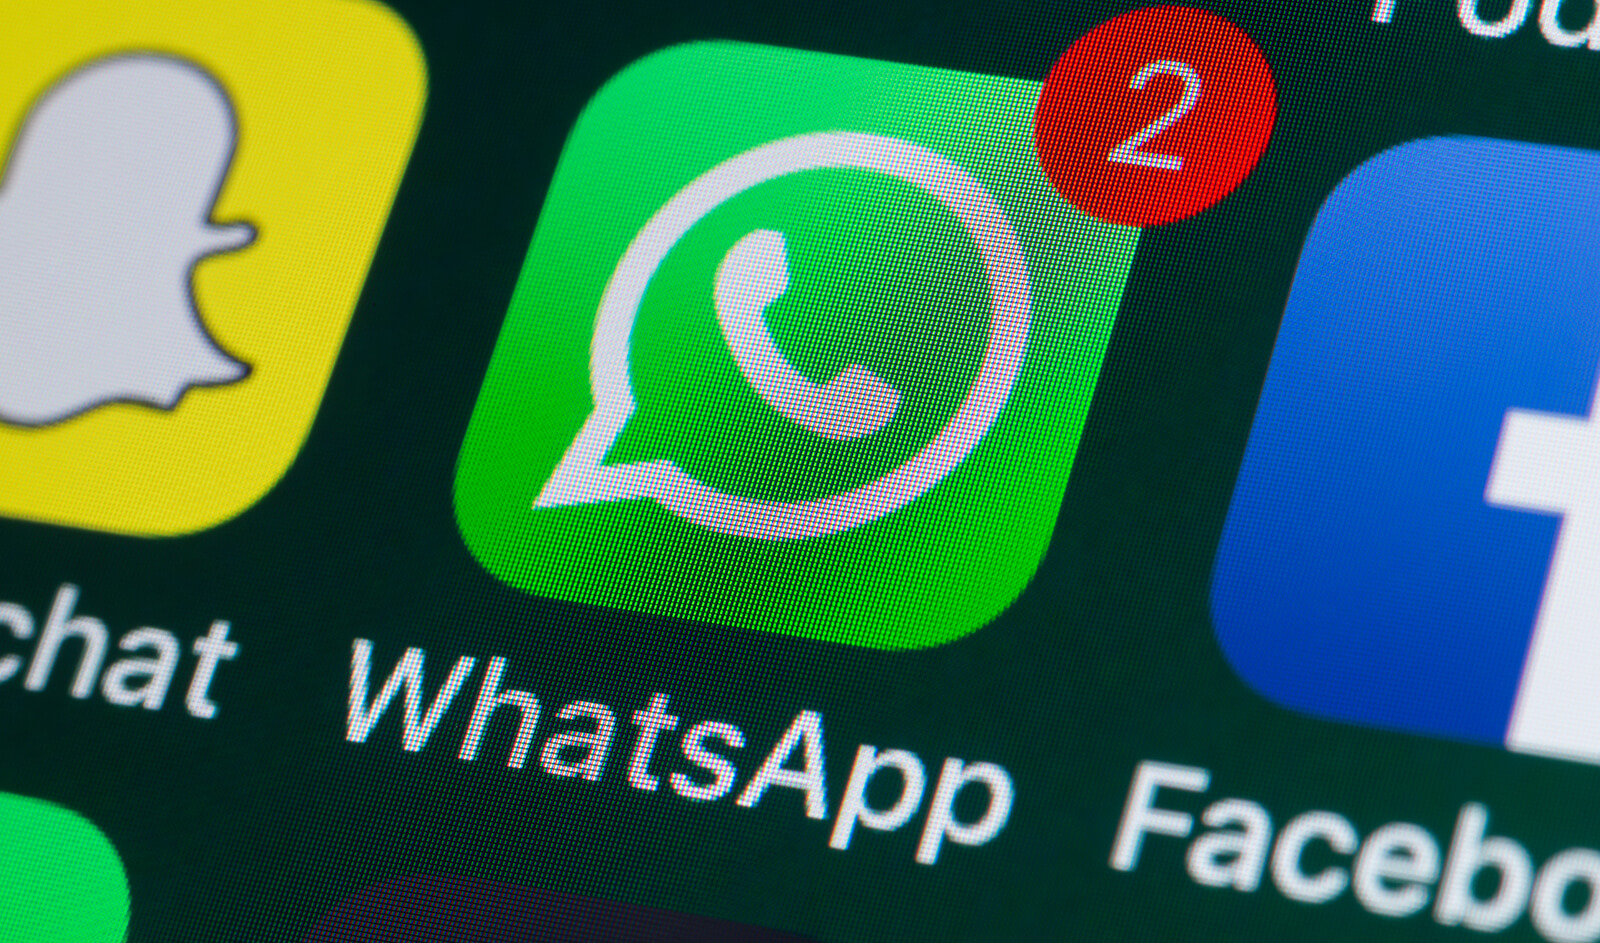 WhatsApp Advertising: The most anticipated advertising opportunity in 2020 